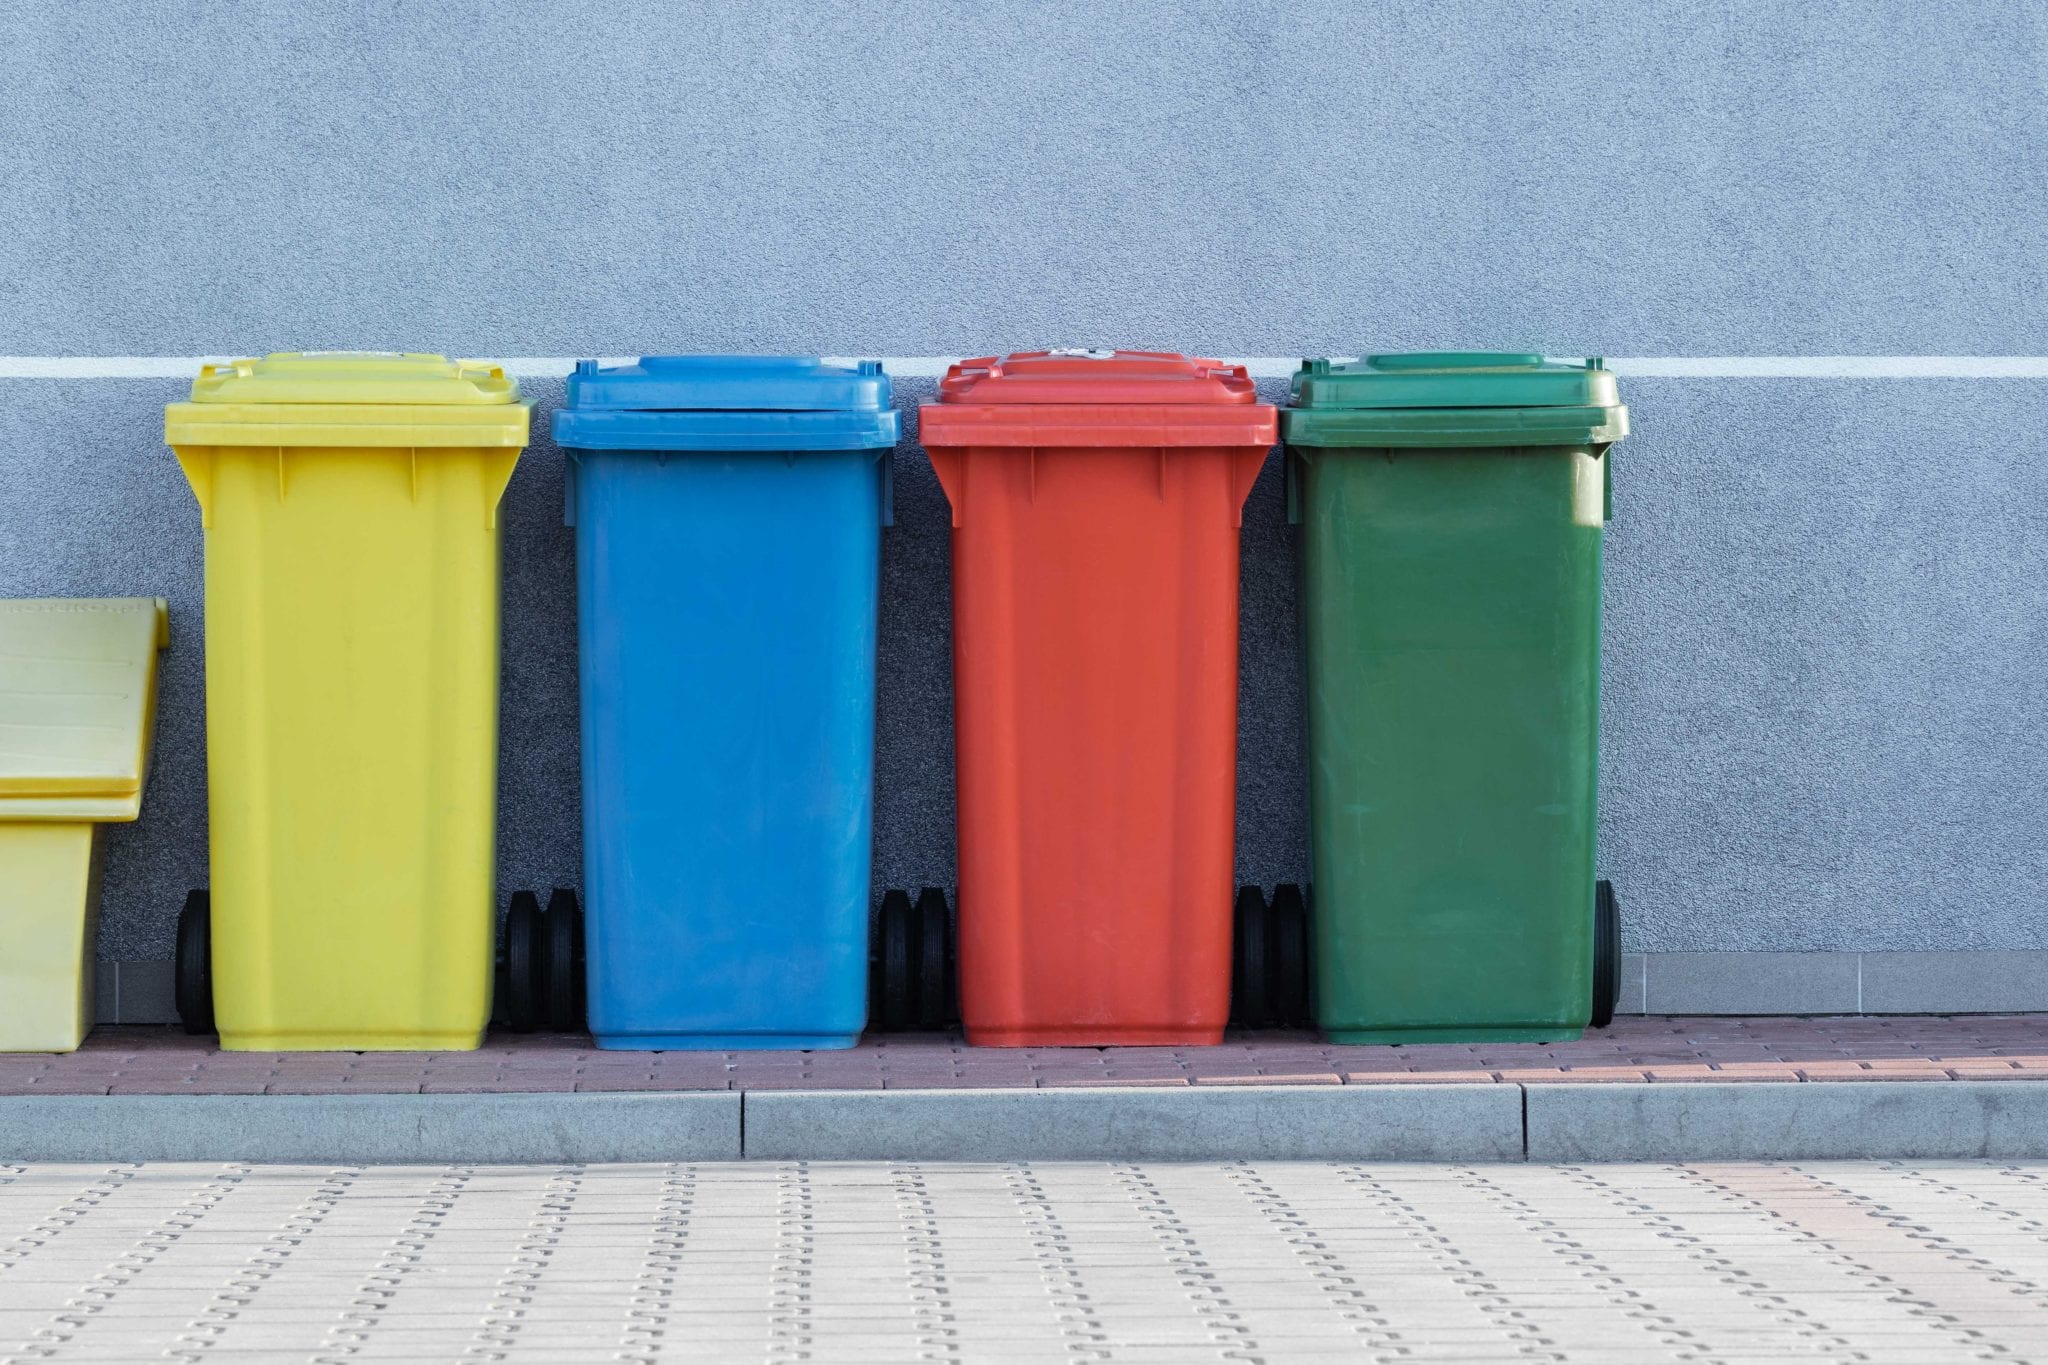 image of four trash cans, yellow, blue, red, and green